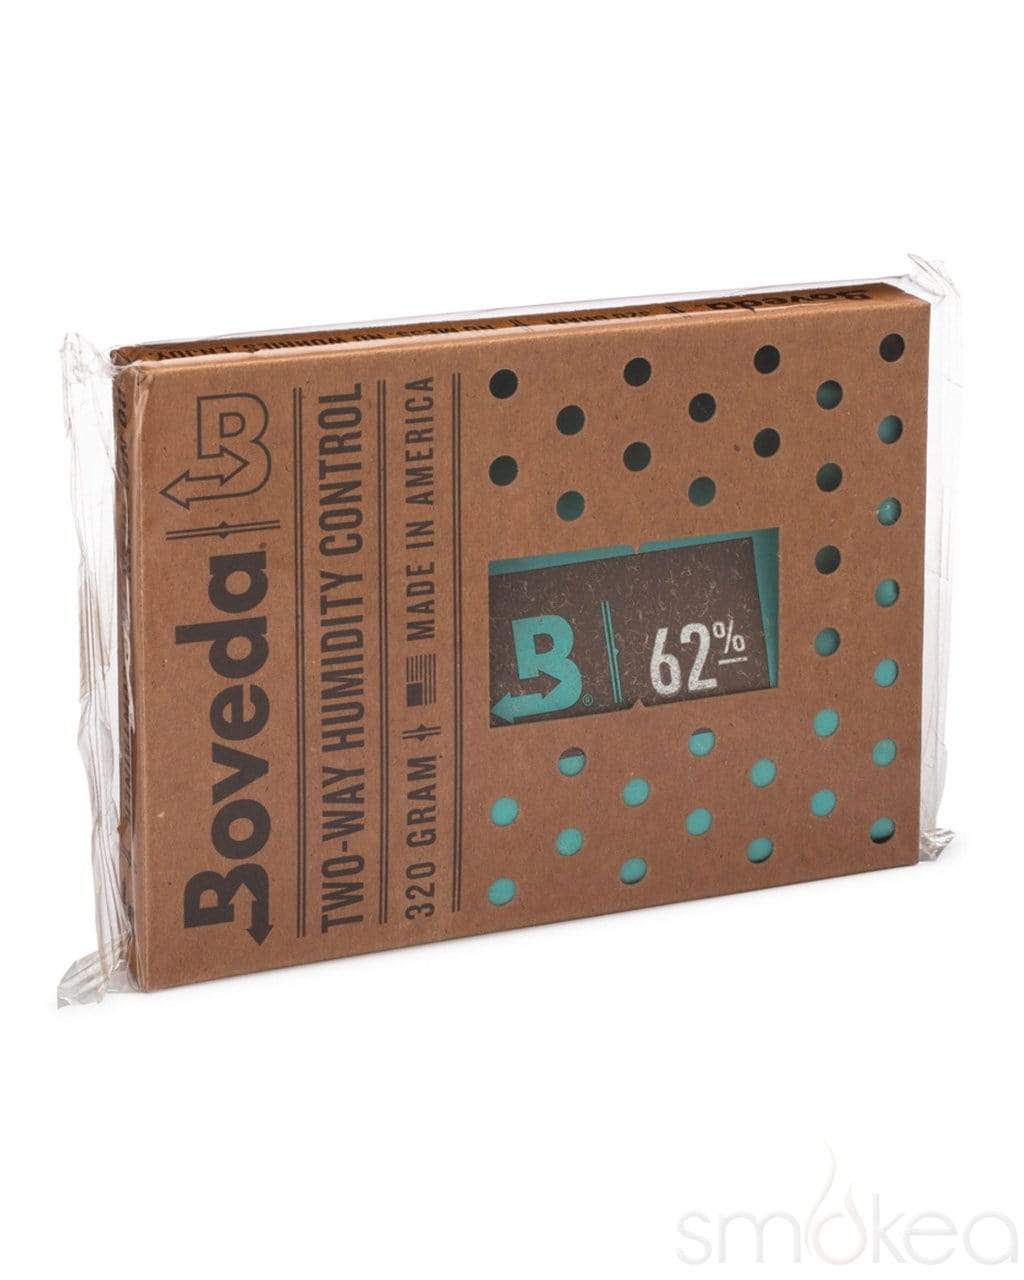 Boveda Size 320 2-Way Humidity Control Pack 62%